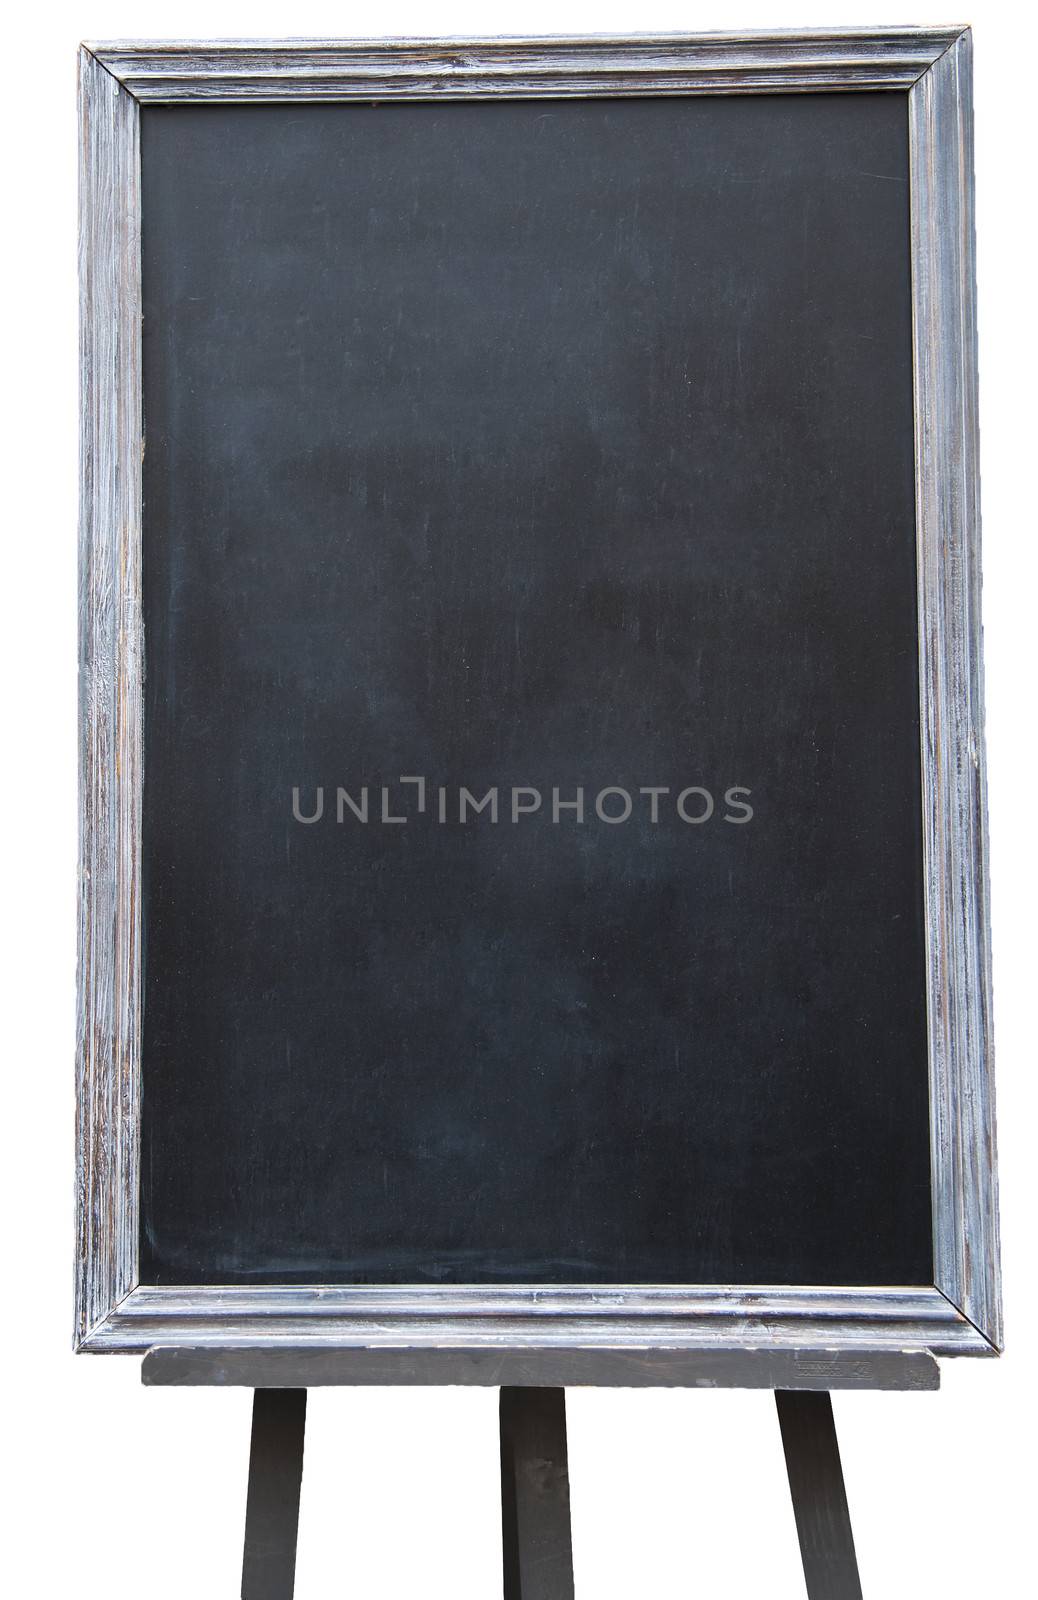 A blackboard isolated on a white background.